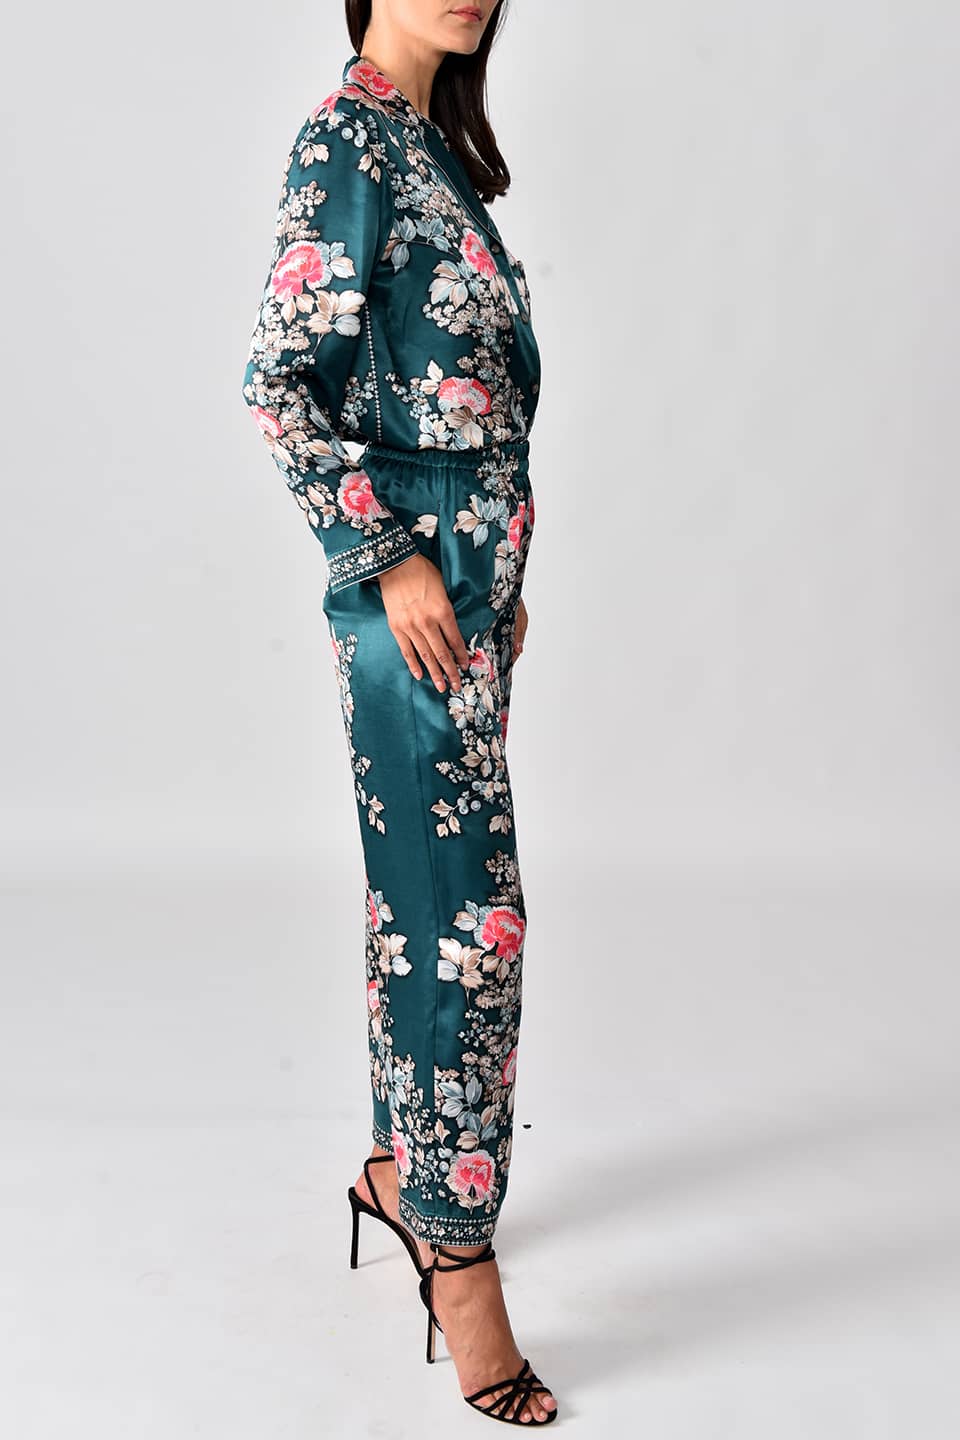 Thumbnail for Product gallery 1, Model wearing silk satin pyjama trousers in a forest green print from stylist Vilshenko, in pose